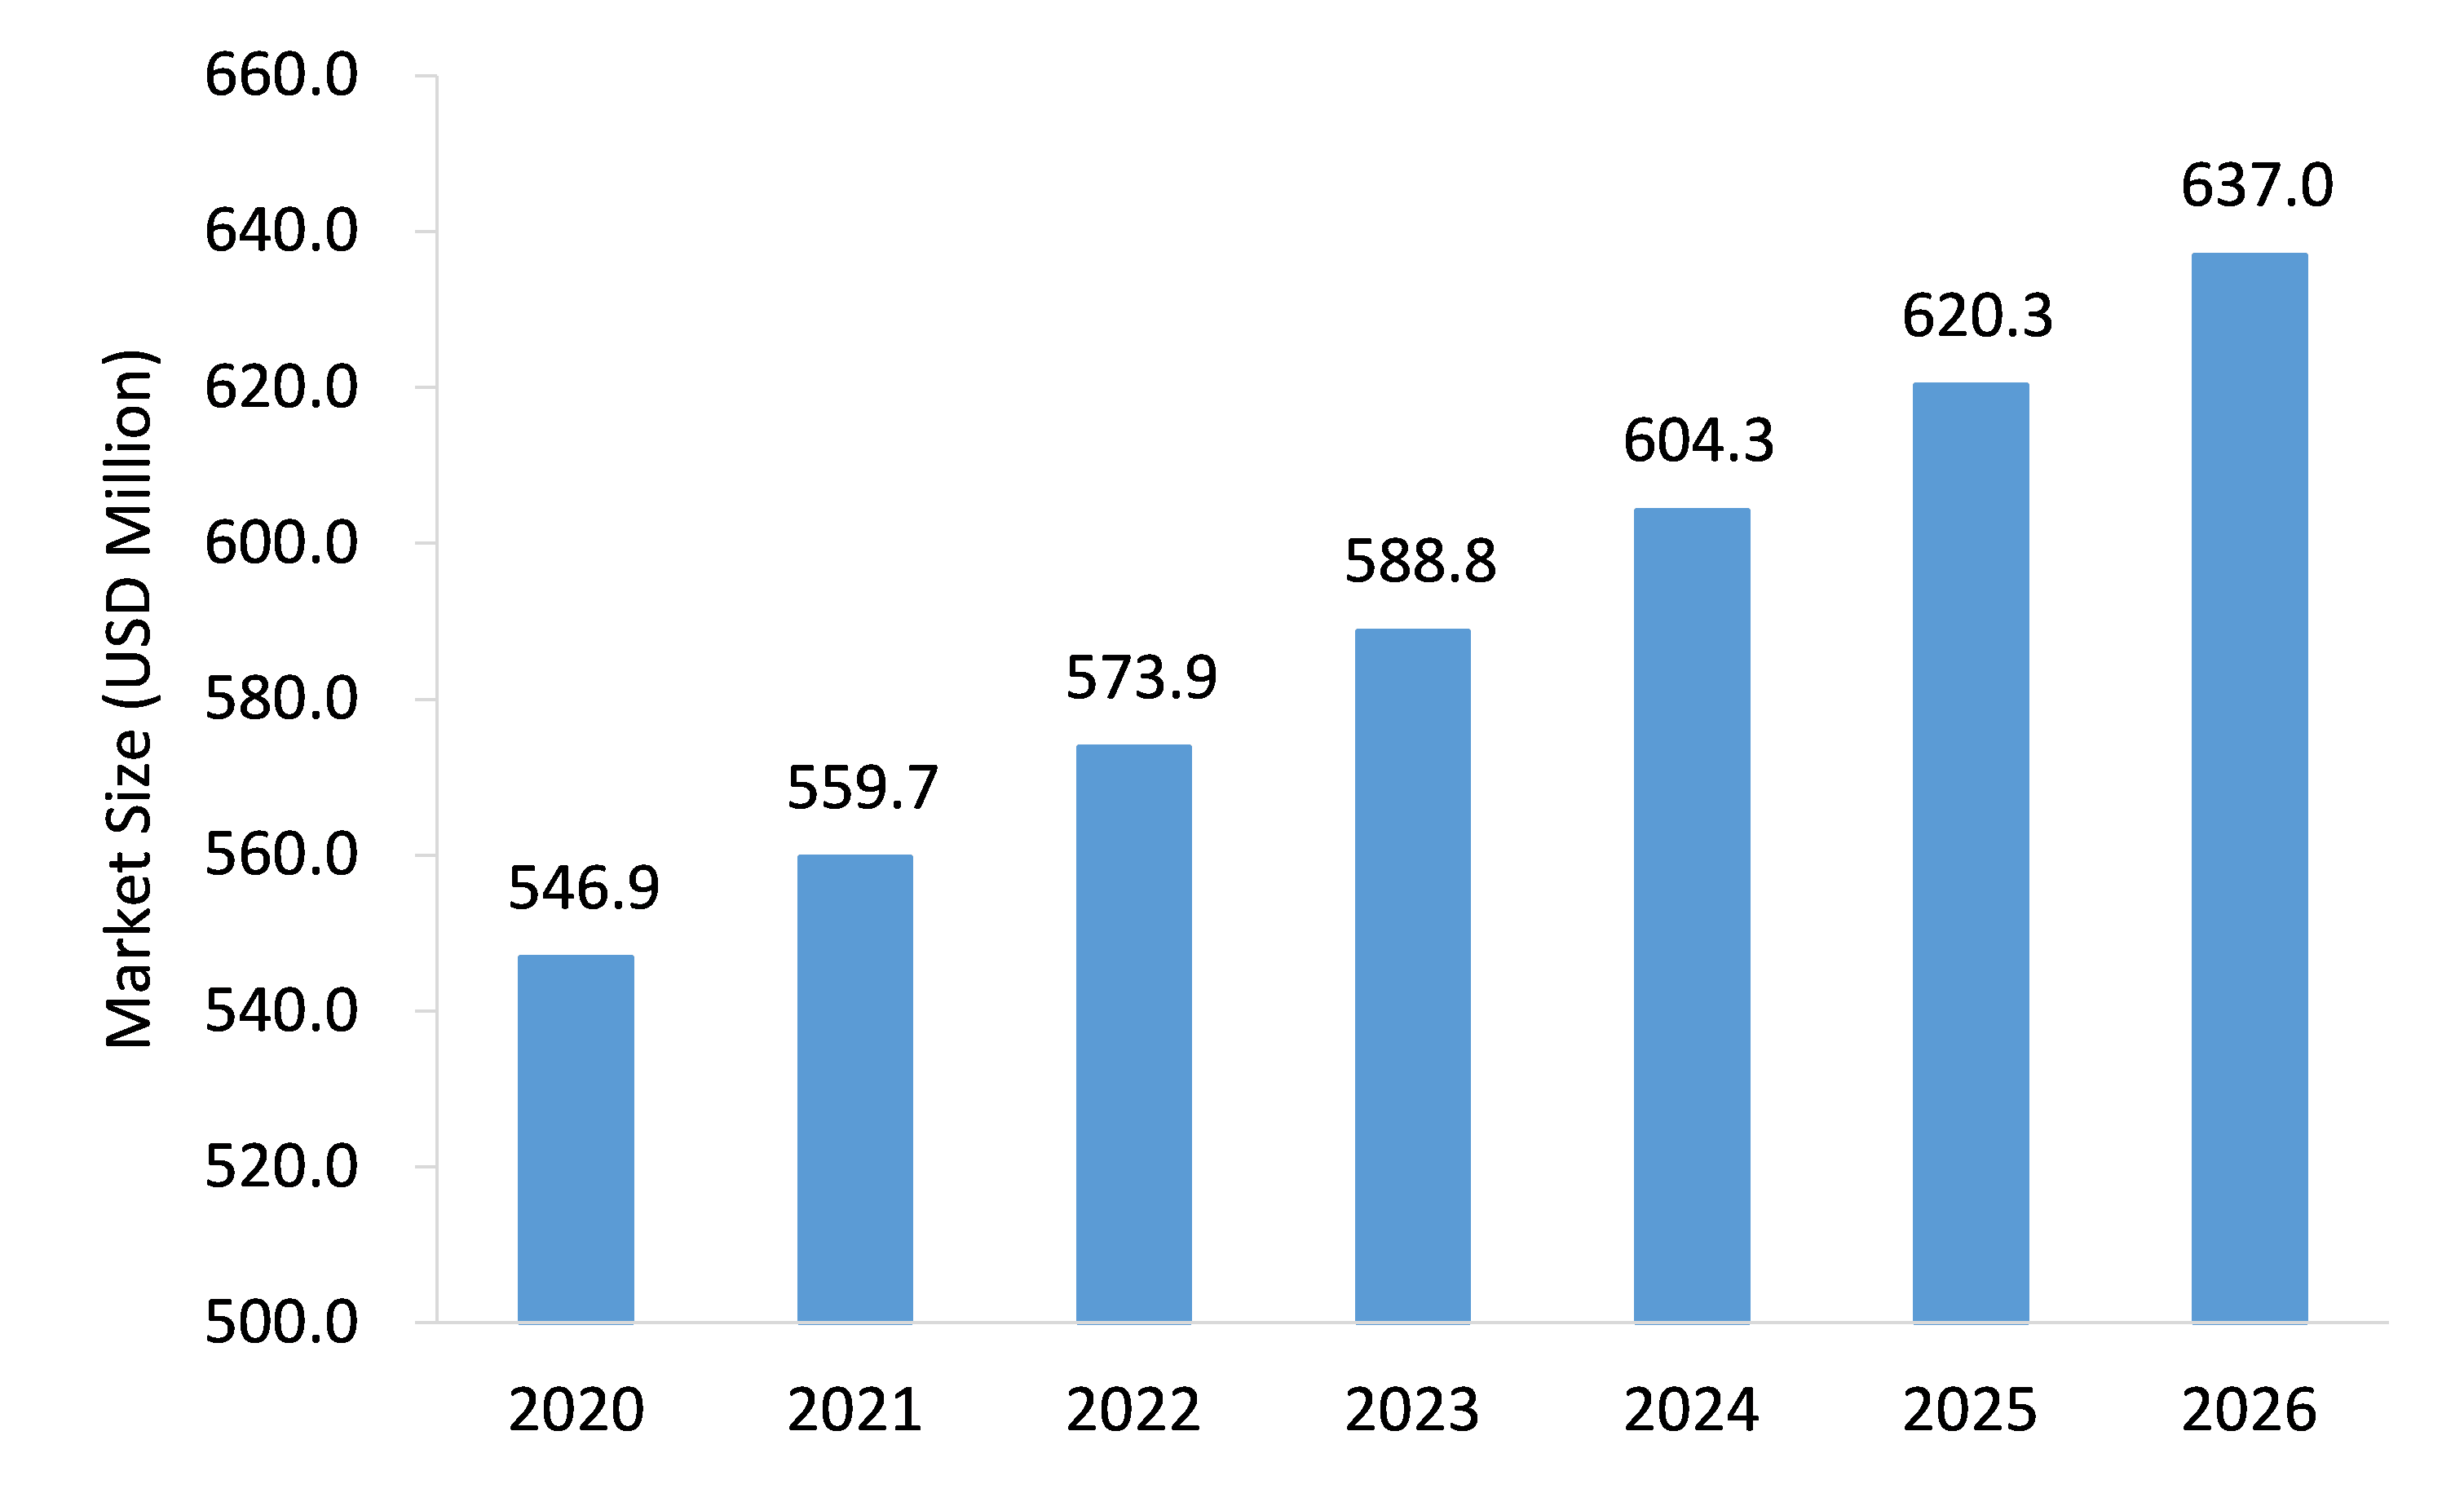 Drying-Curing-Equipment-Market-Forecast